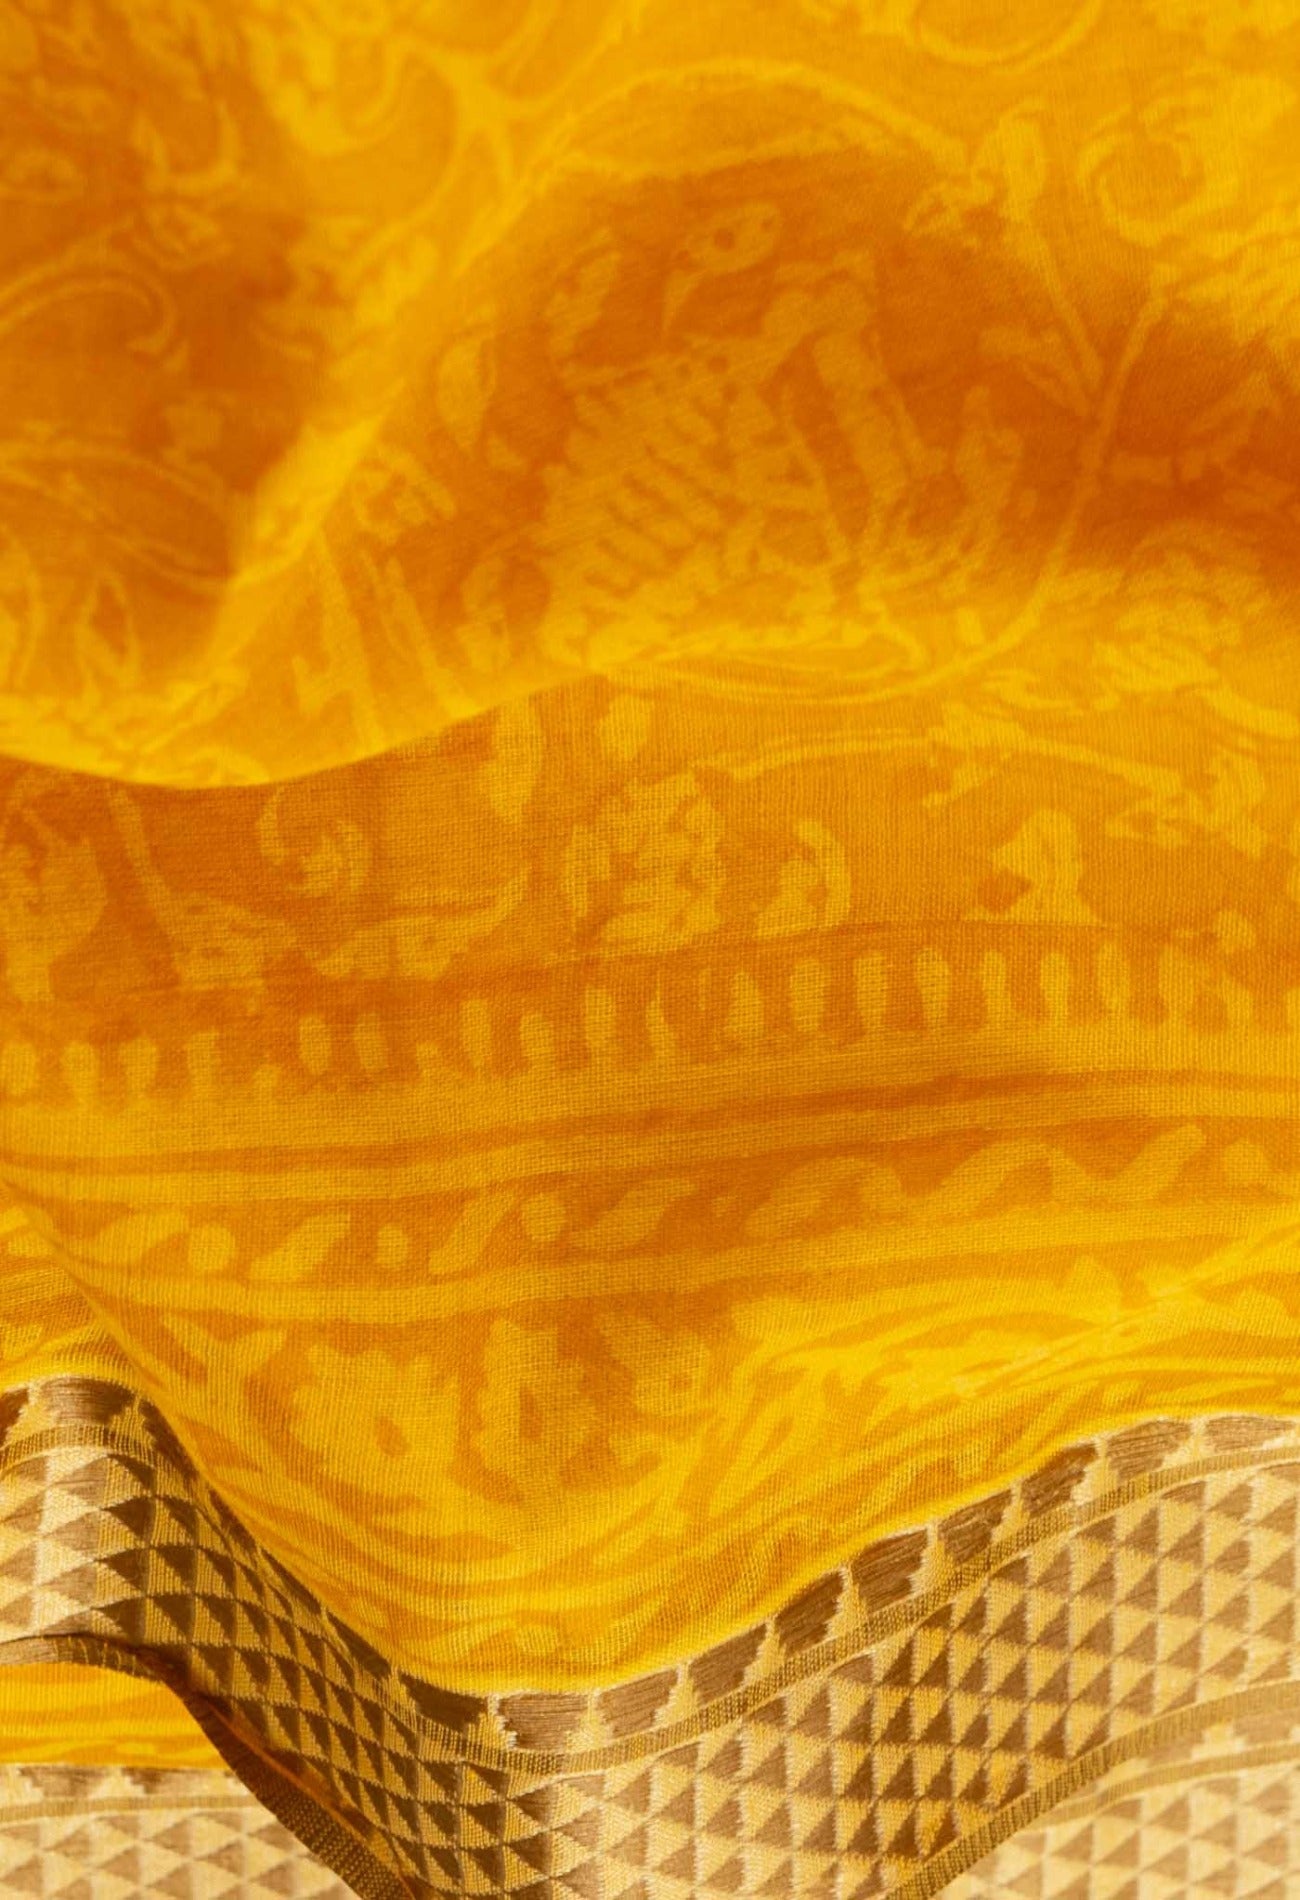 Online Shopping for Yellow Pure Bagh venkatagiri Superfine Cotton Saree with Bagh from Andhra Pradesh at Unnatisilks.com India
